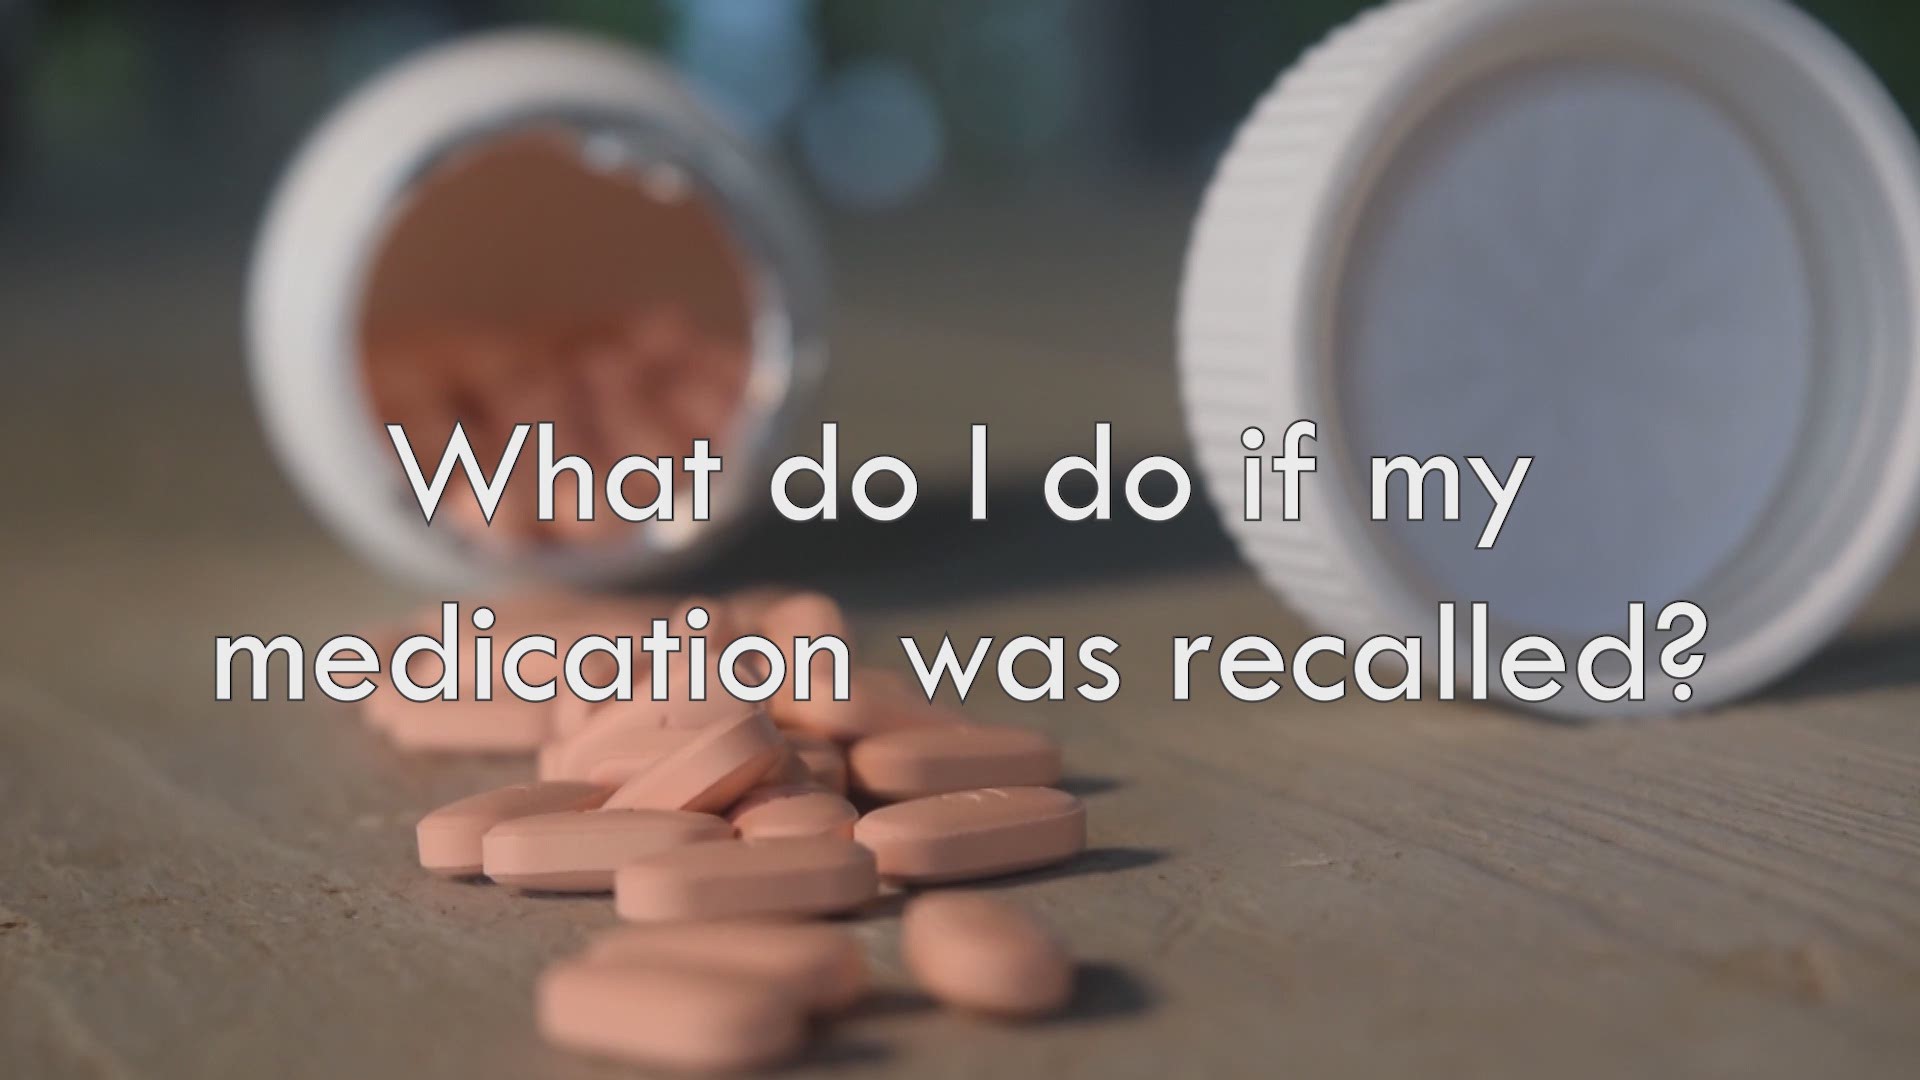 What do you do if your medication is recalled?